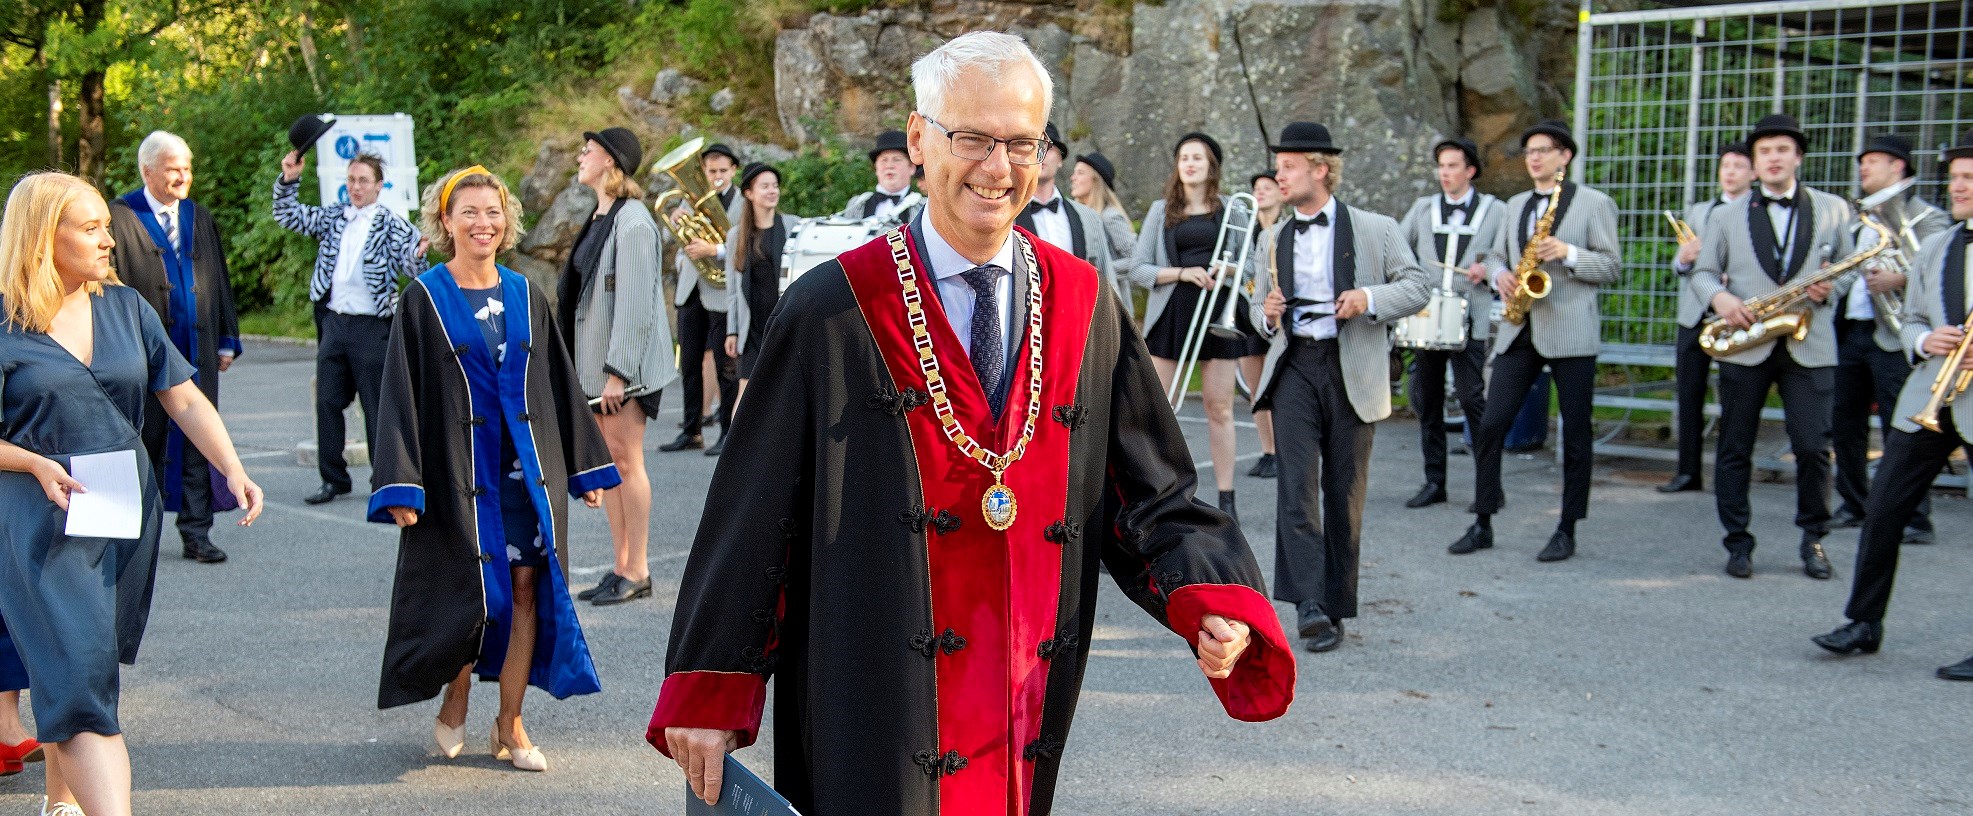 NHH's rector Øystein Thøgersen is very pleased with the number of applicants and that NHH has been the first choice for most applicants since 2020.